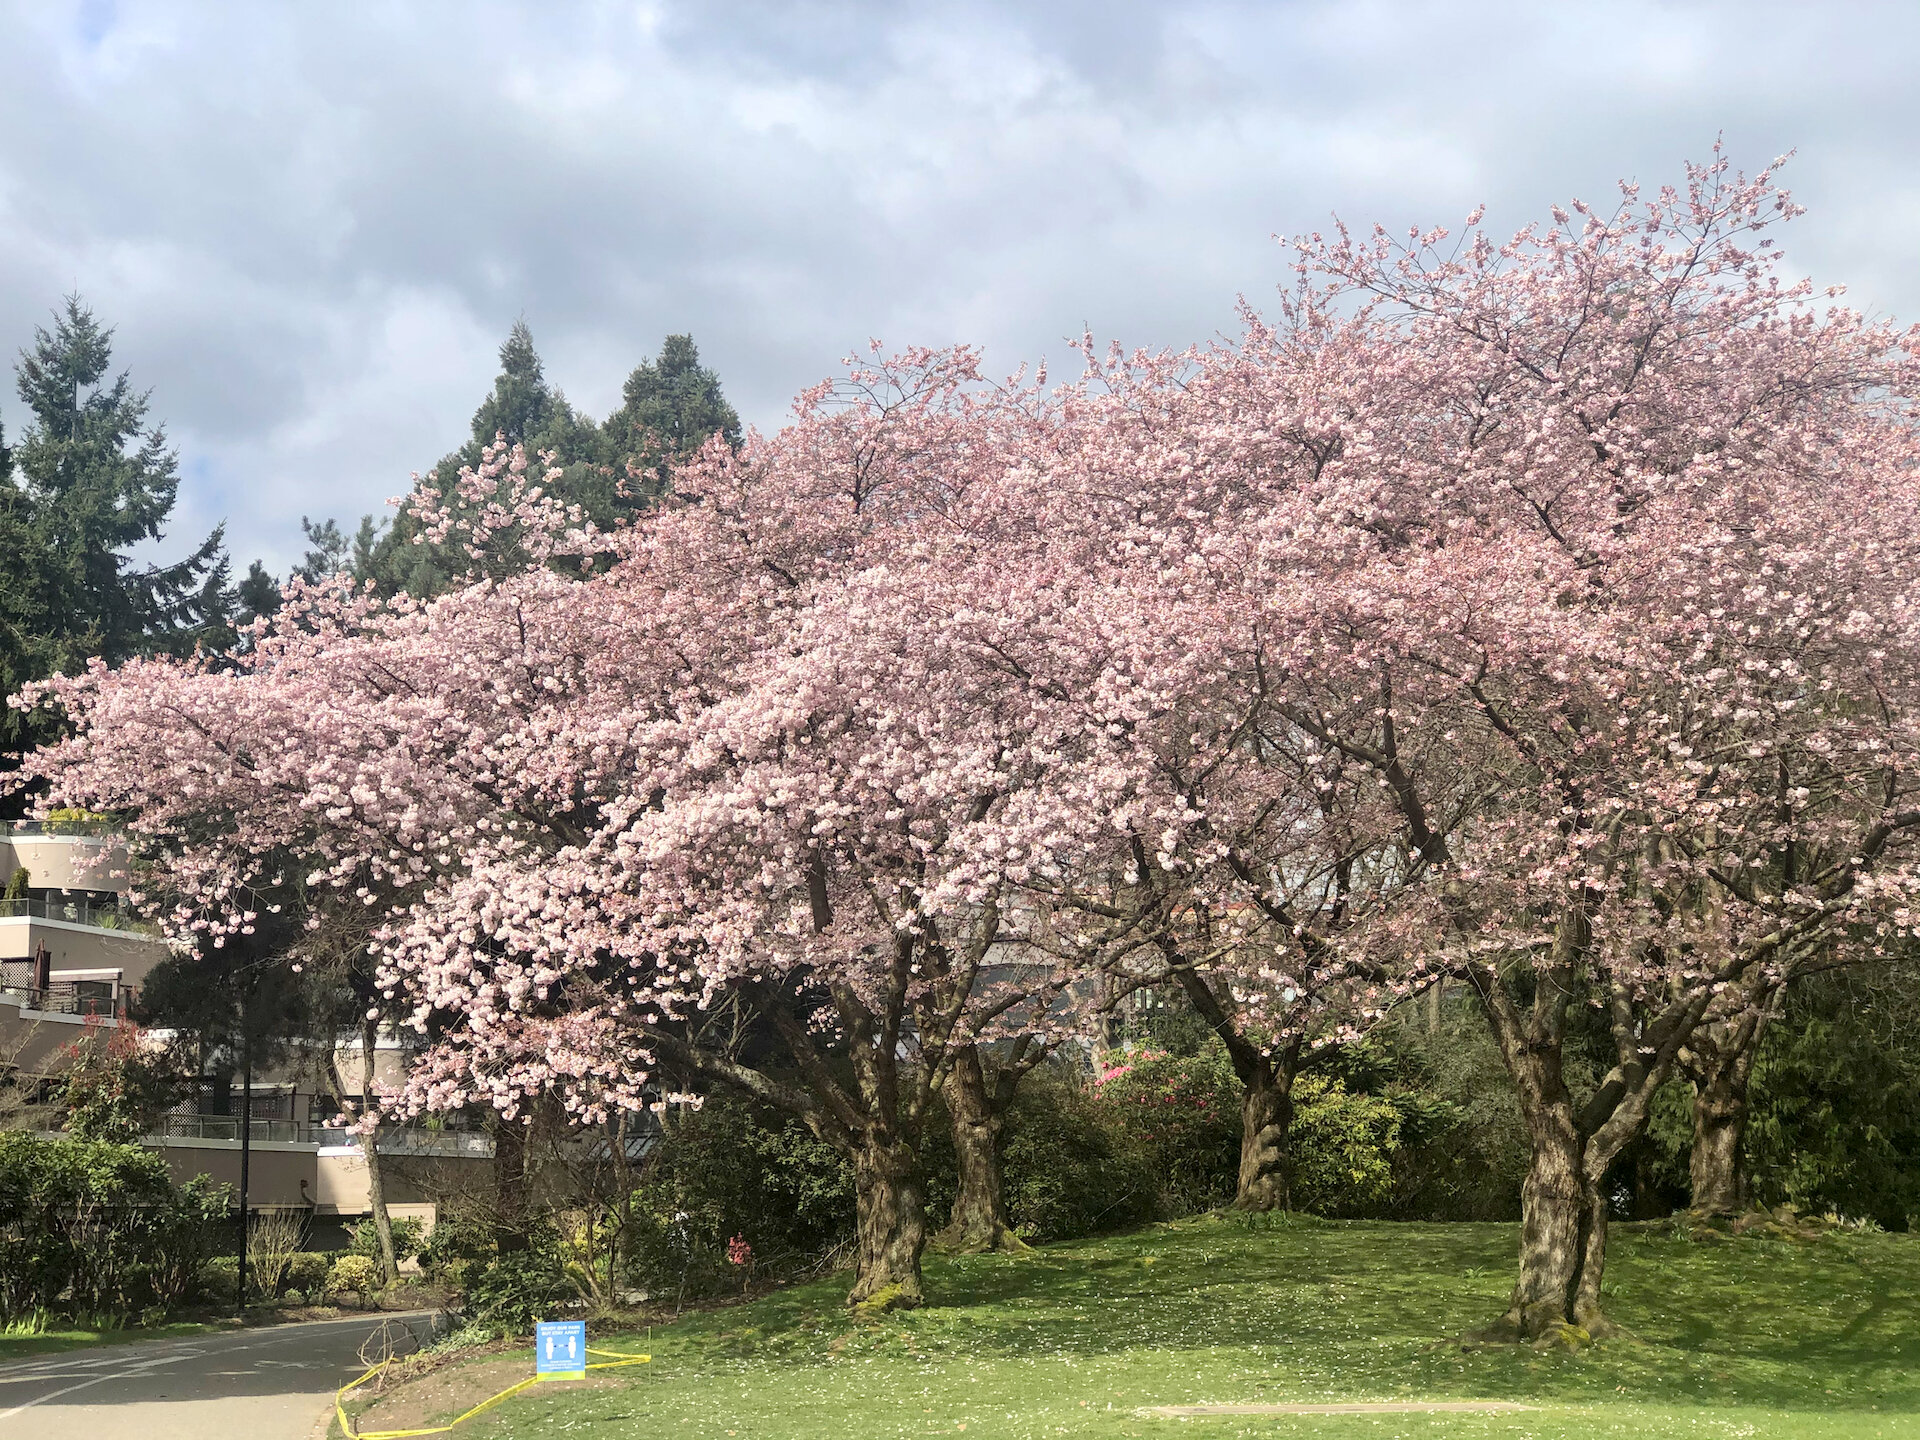  This is the perfect time for the cherry trees in Vancouver. They’re everywhere, and bloom for a good long time. 